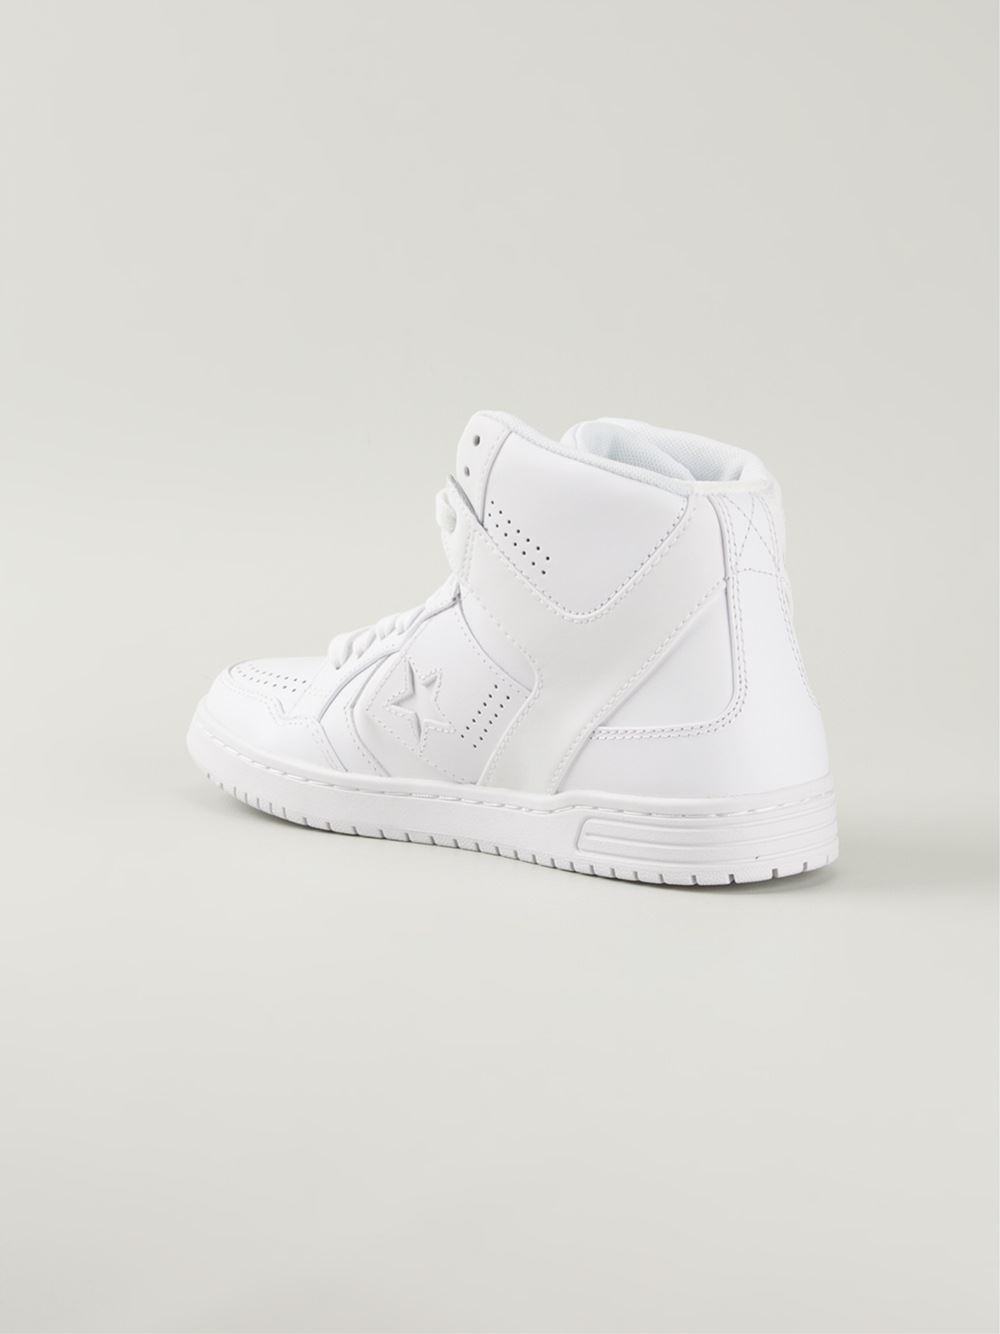 Converse 'Weapon' Hi-Top Sneakers in White for Men - Lyst